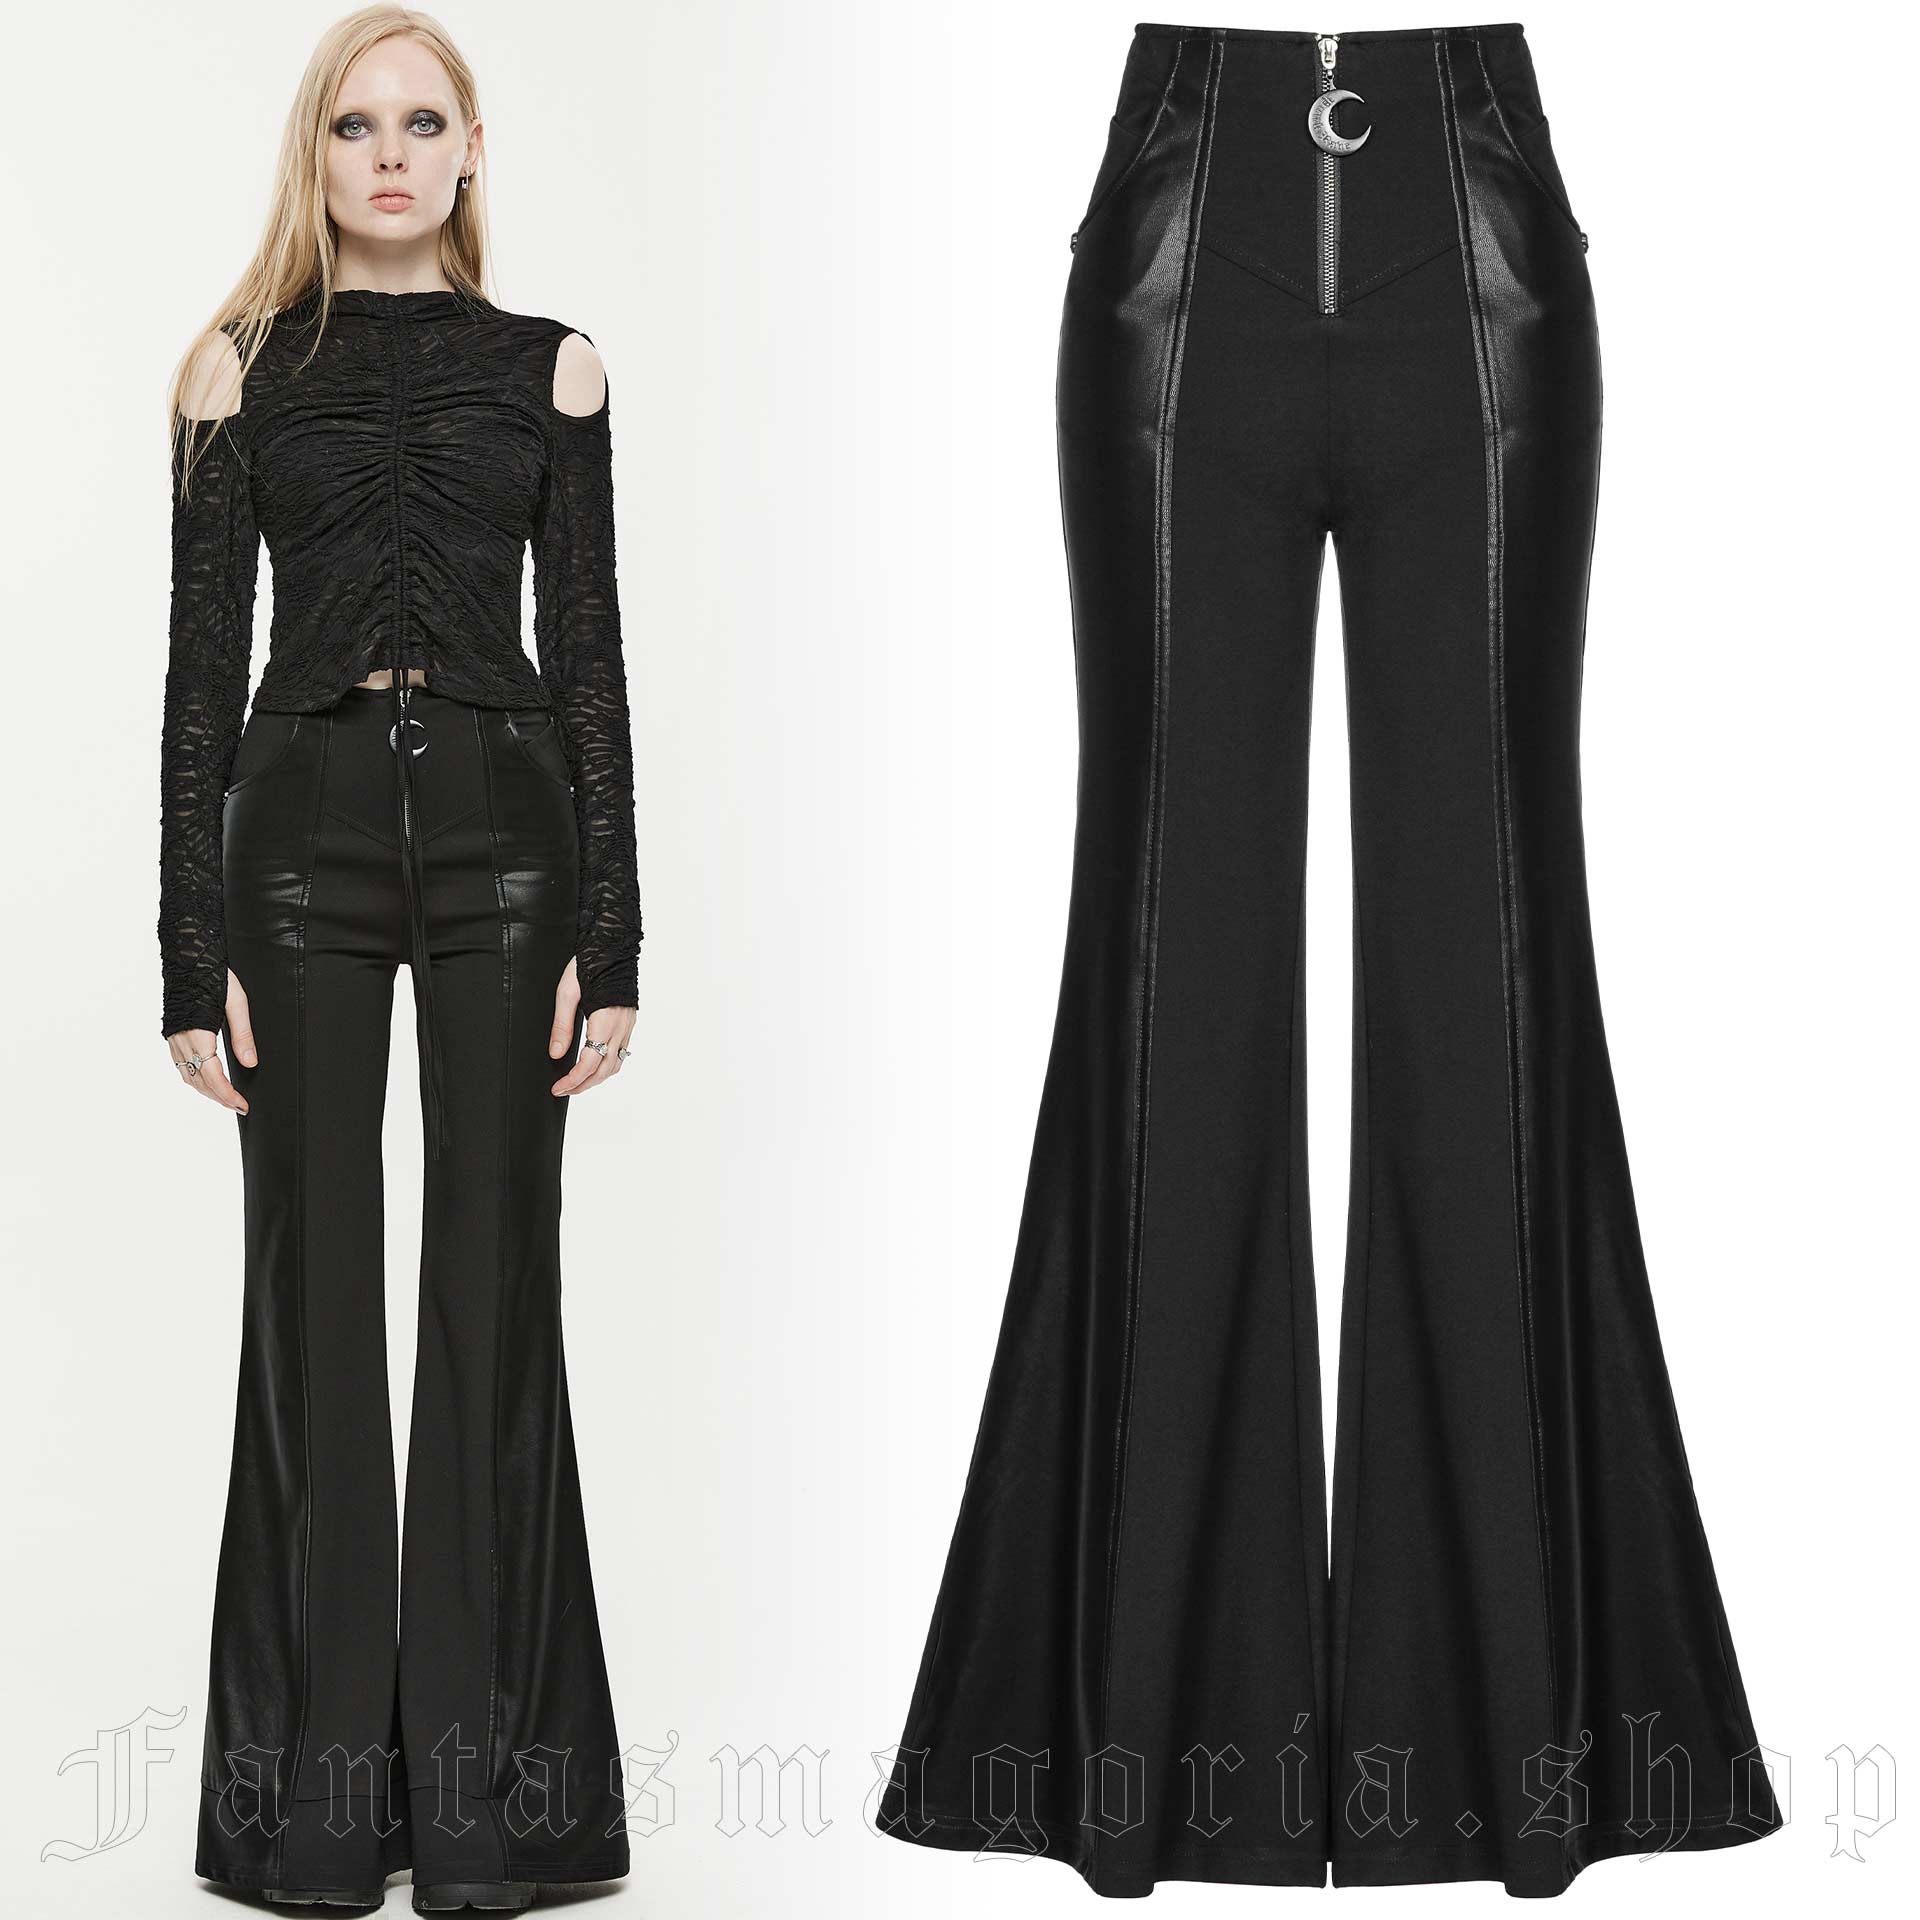 Hight waist bell bottom Pants with pockets. Goth Black Flare Pant